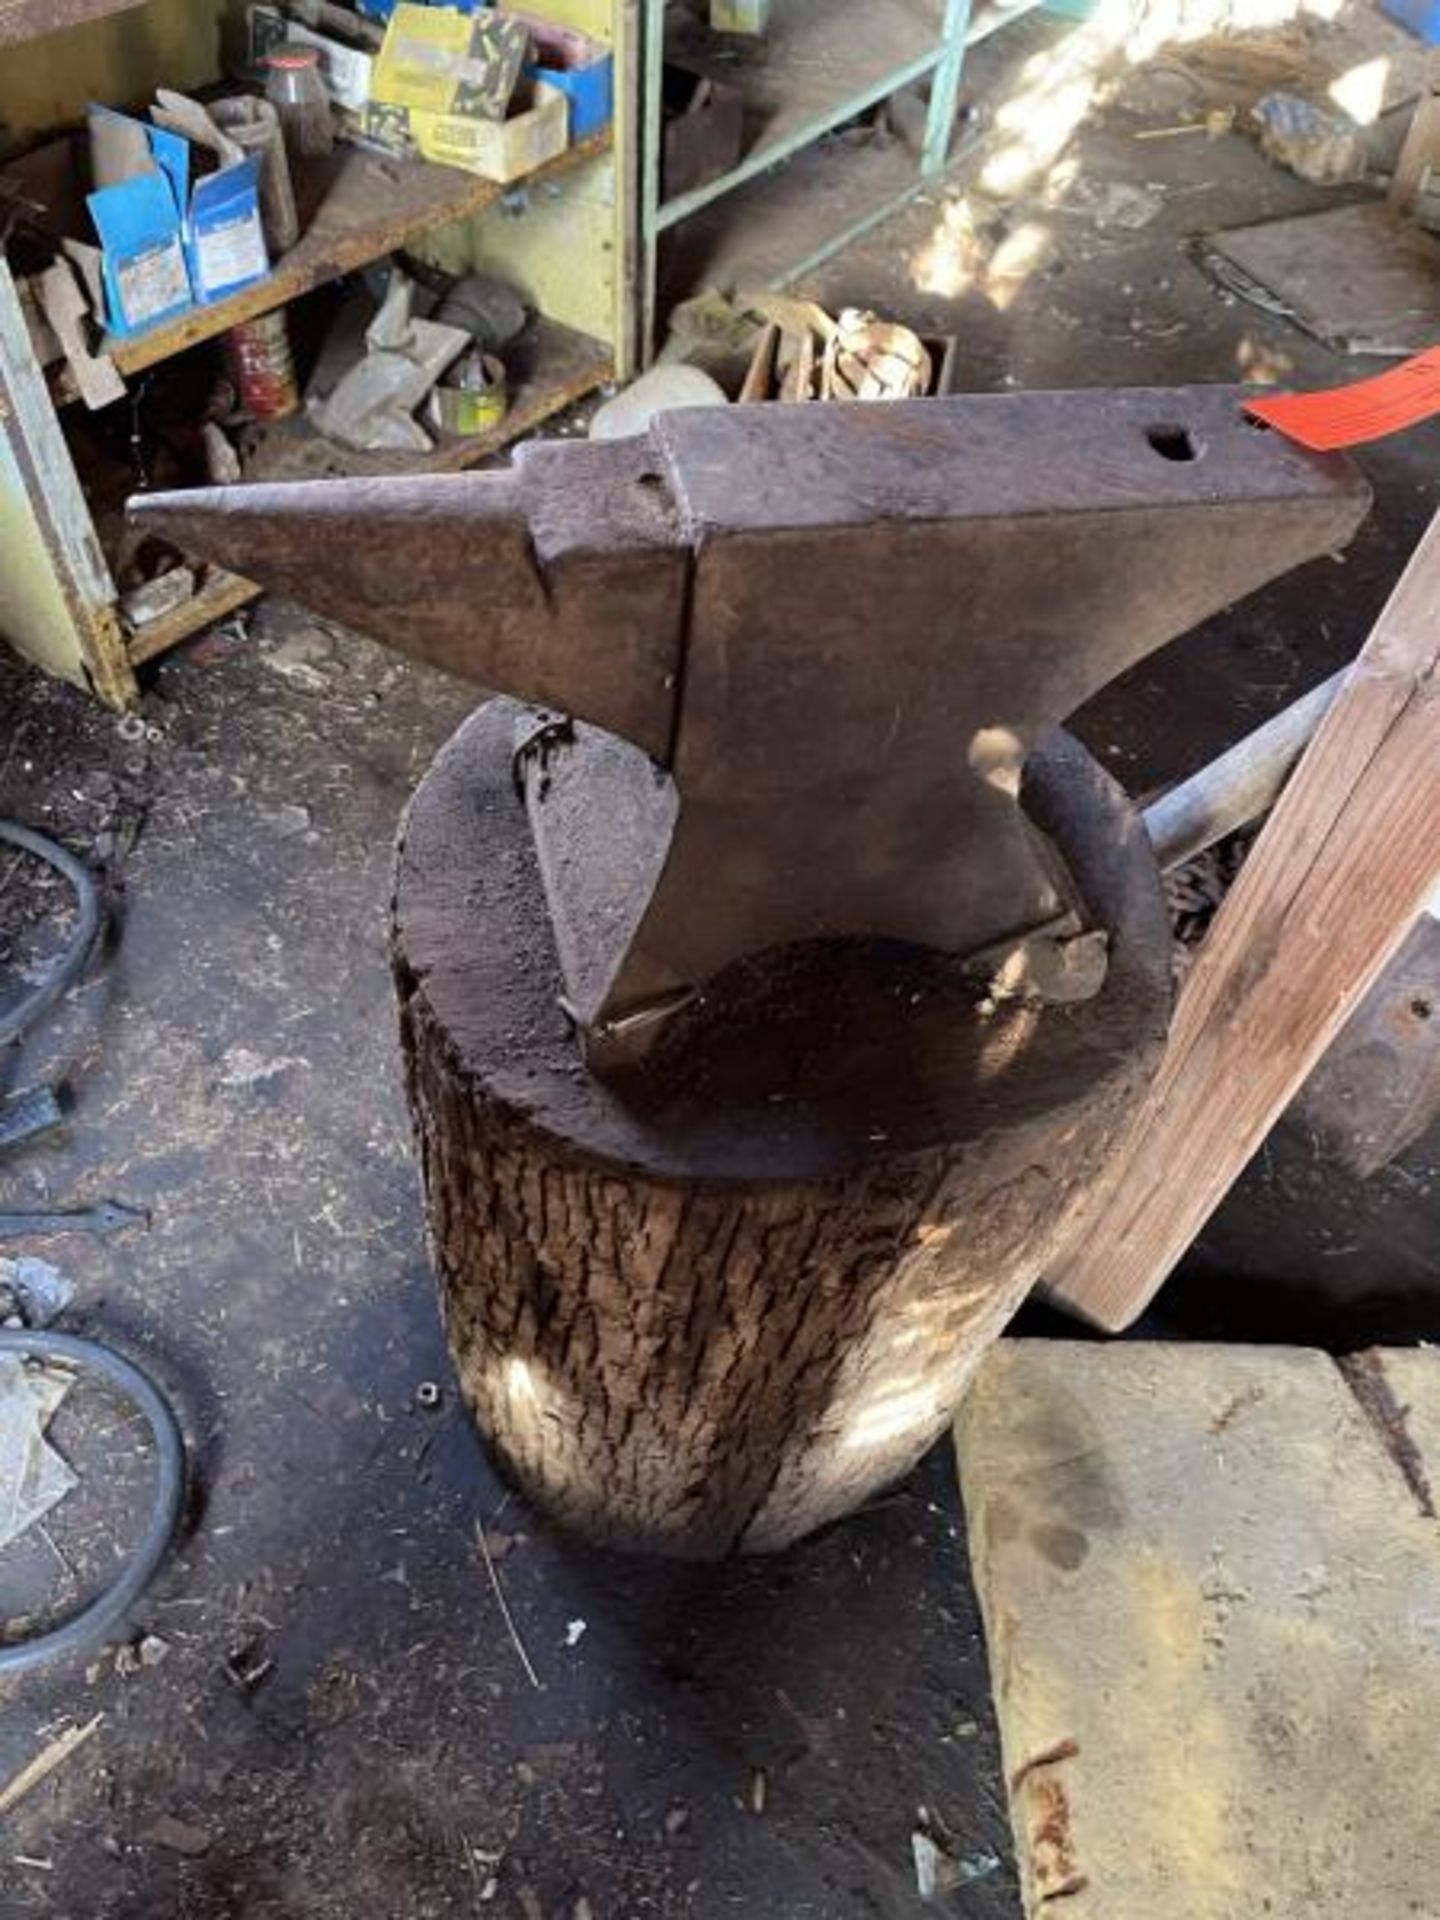 Blacksmith Anvil 10" Tall x 18.5" Long x 3.25" Wide; Mounted on LogWide; Mounted on Log - Image 5 of 5